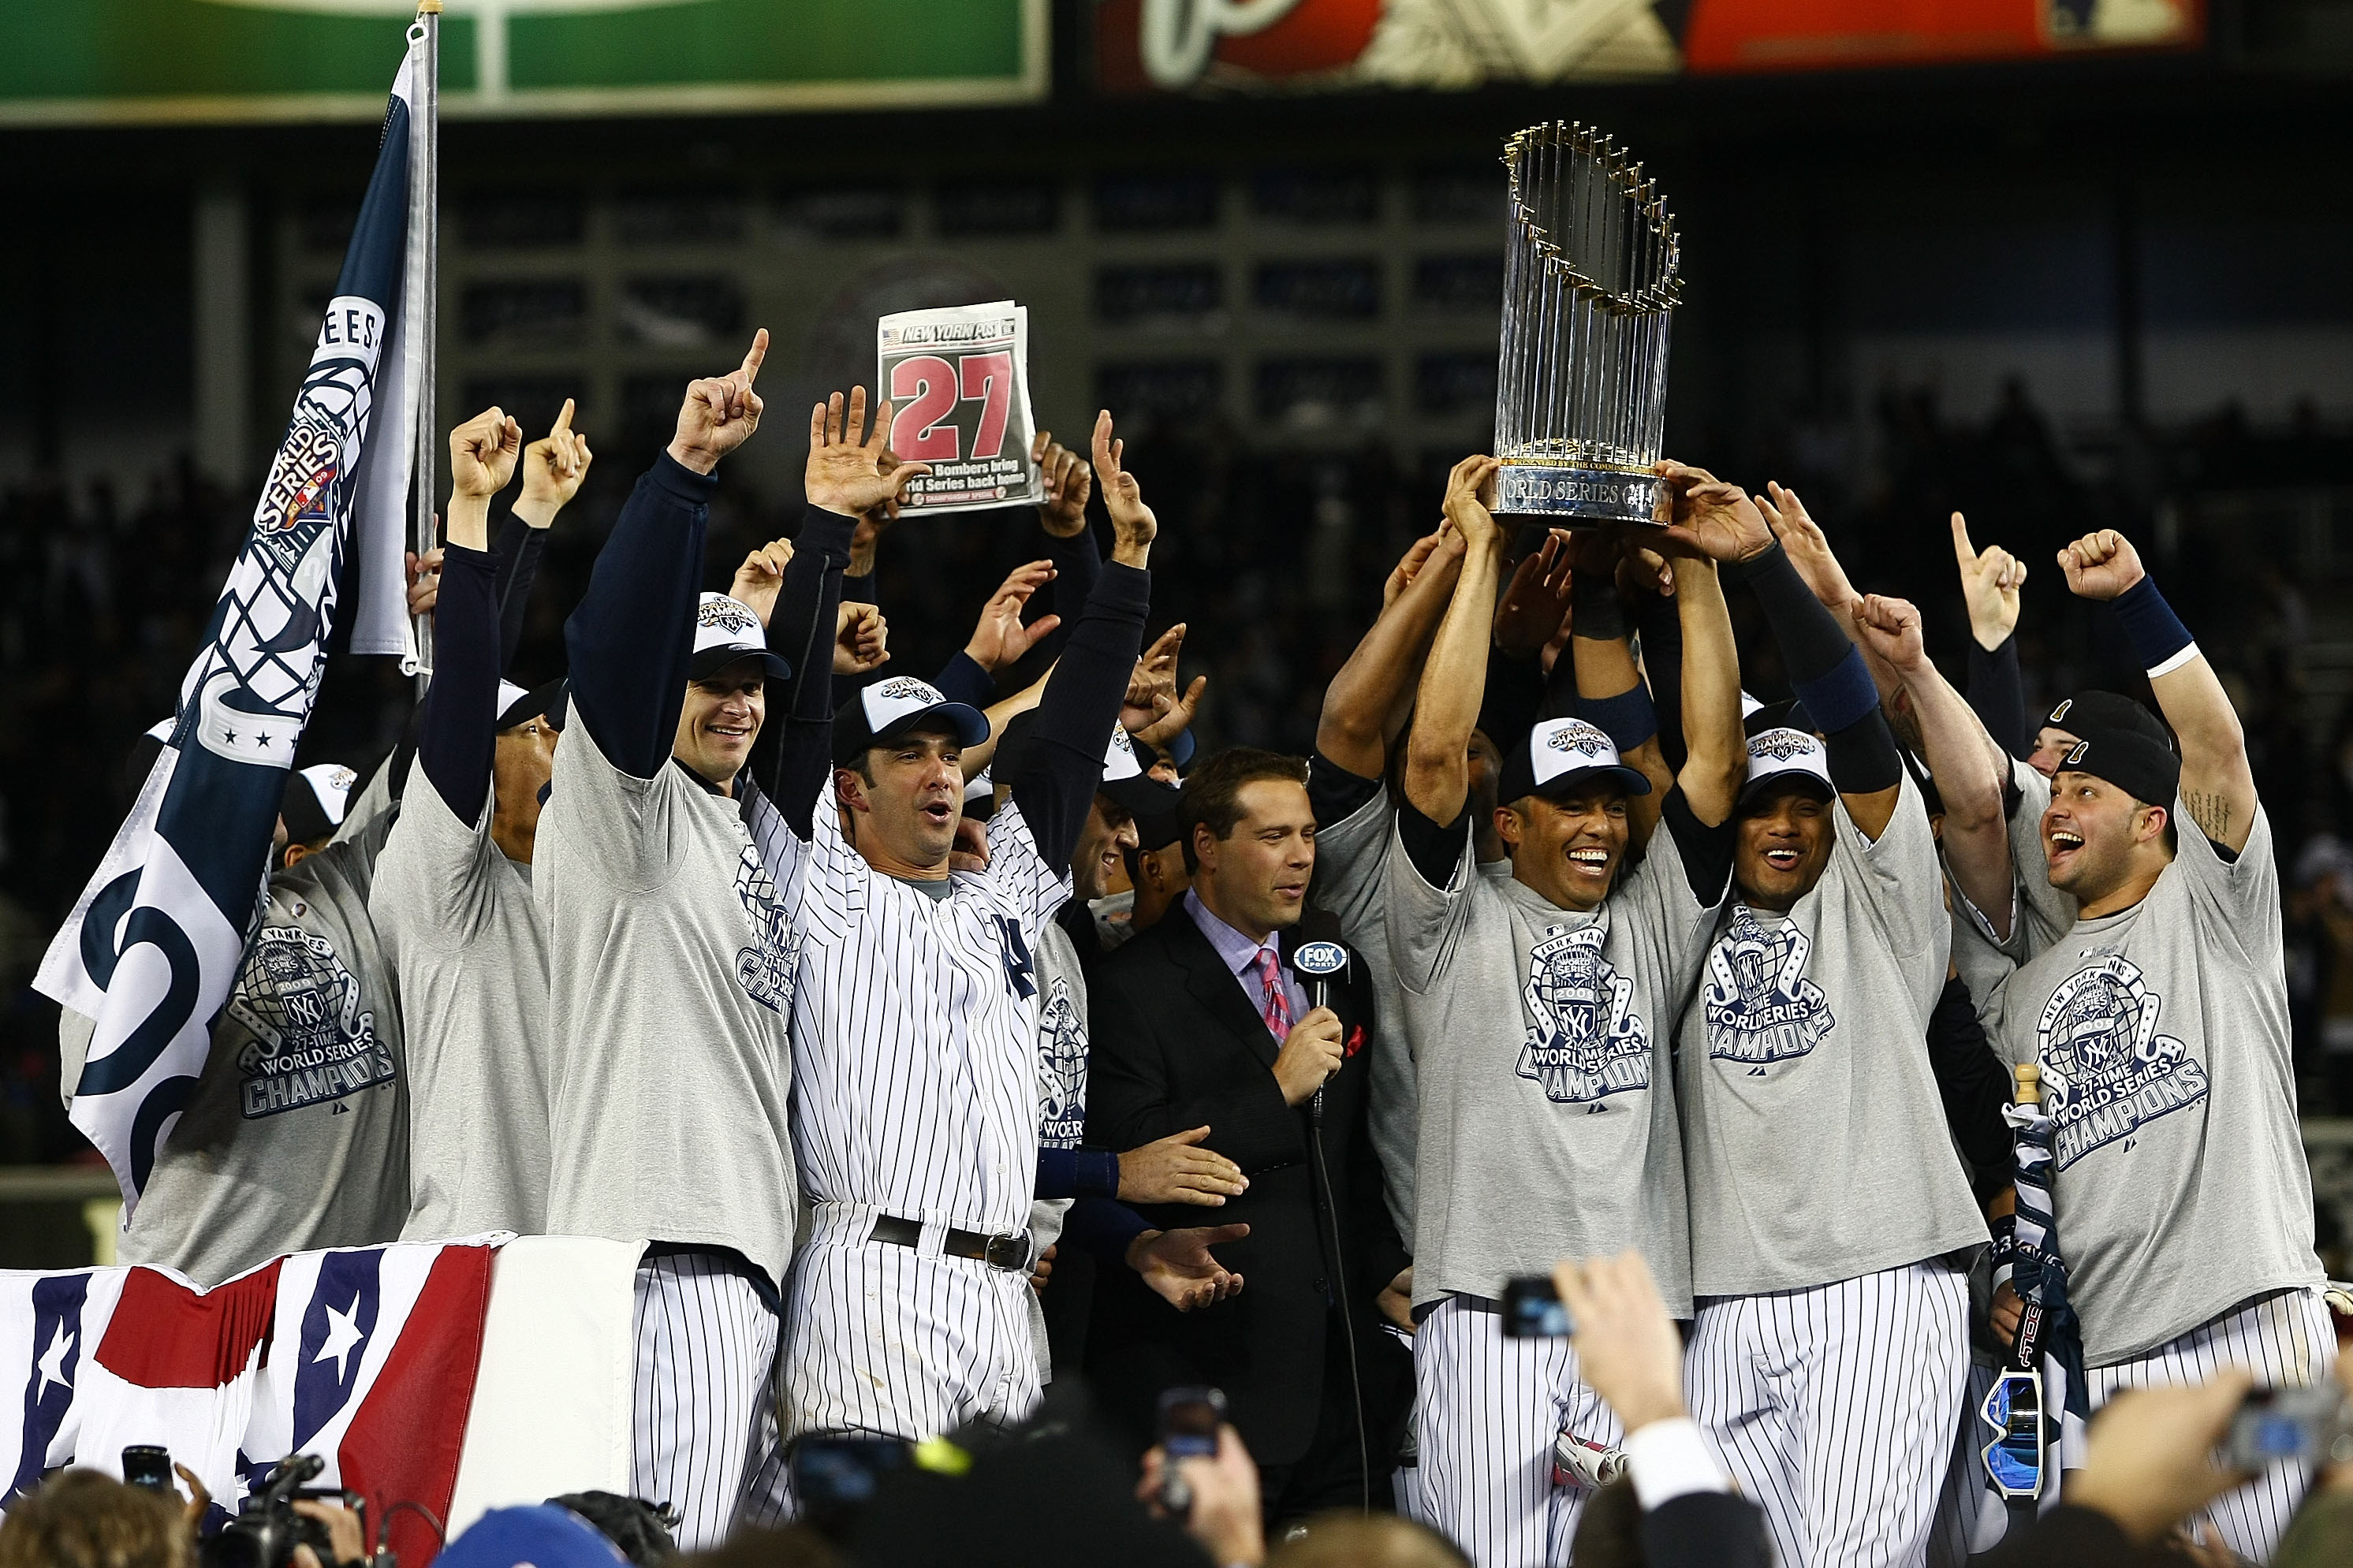 Here are the 5 biggest threats to Yankees winning the World Series 